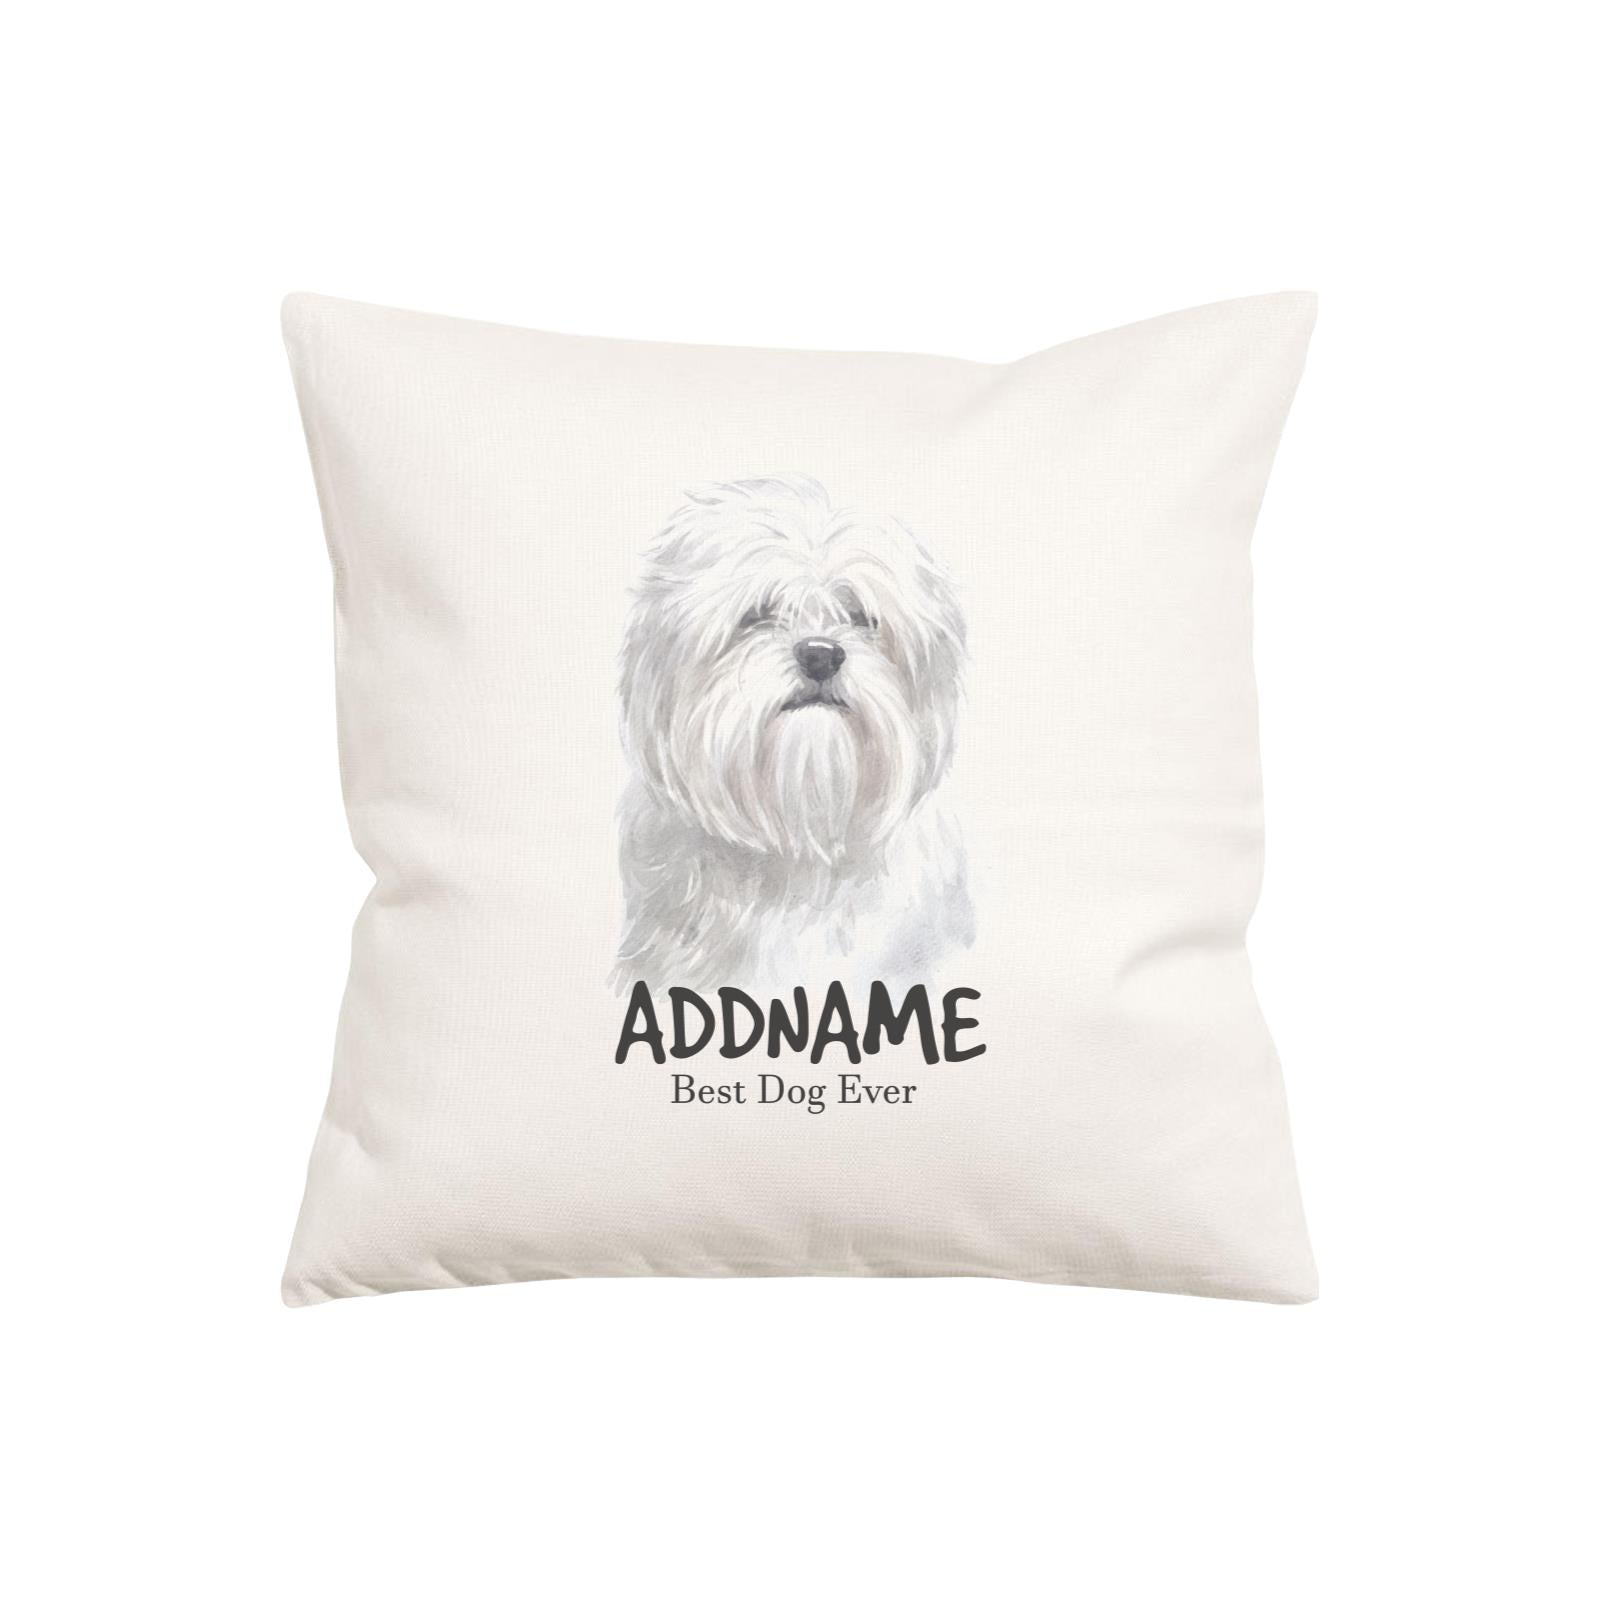 Watercolor Dog Series Lhasa Apso Black Best Dog Ever Addname Pillow Cushion